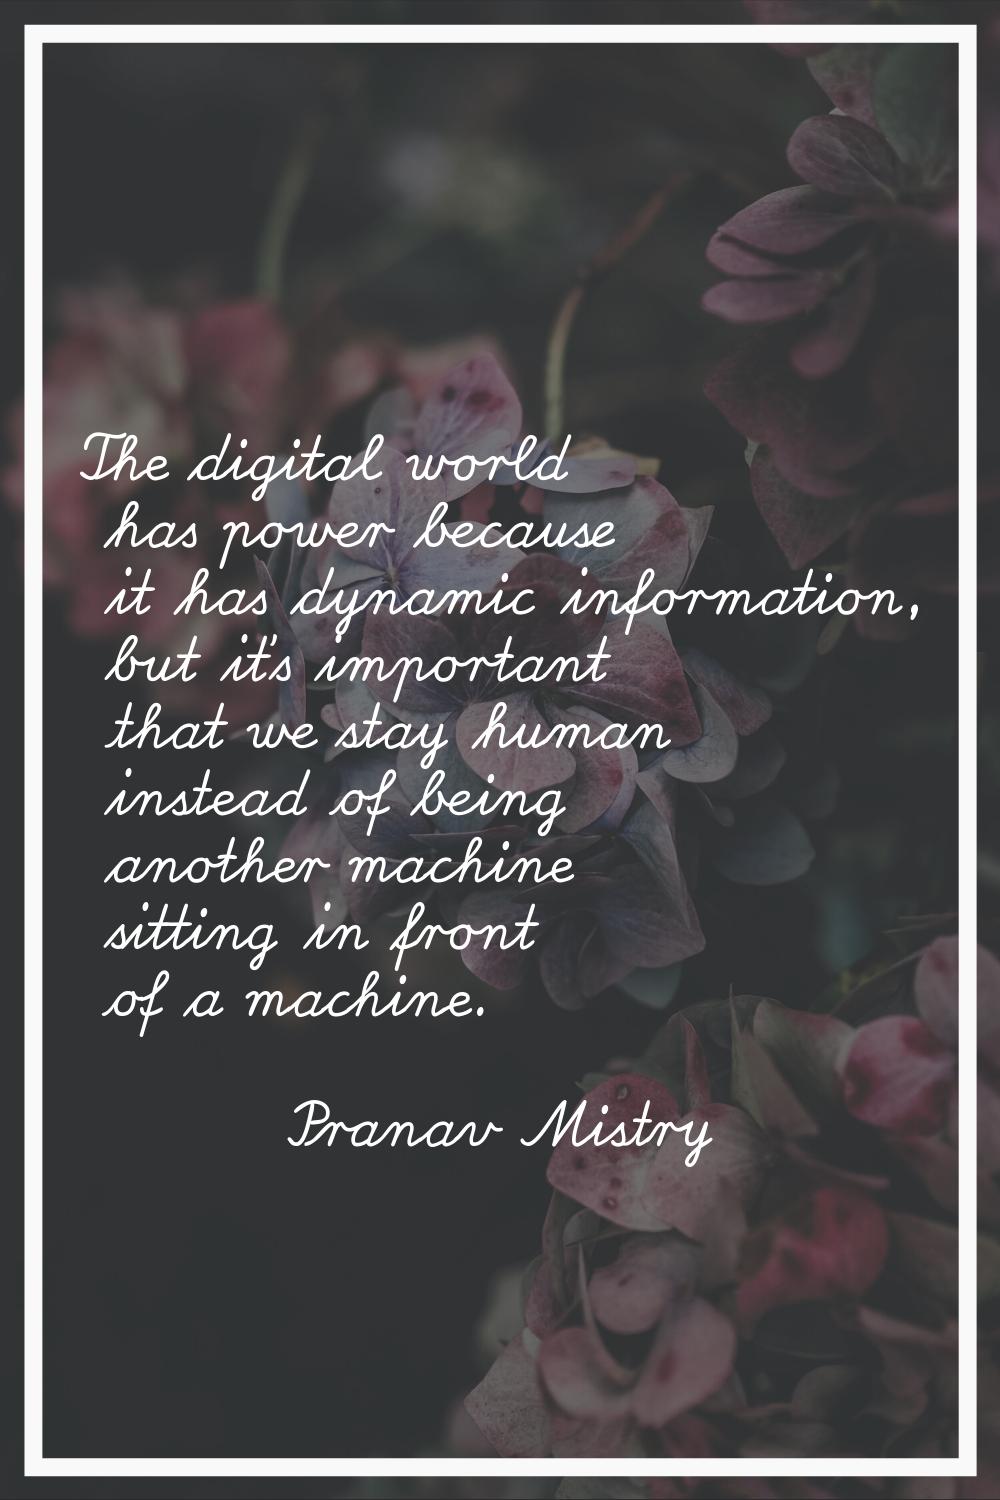 The digital world has power because it has dynamic information, but it's important that we stay hum